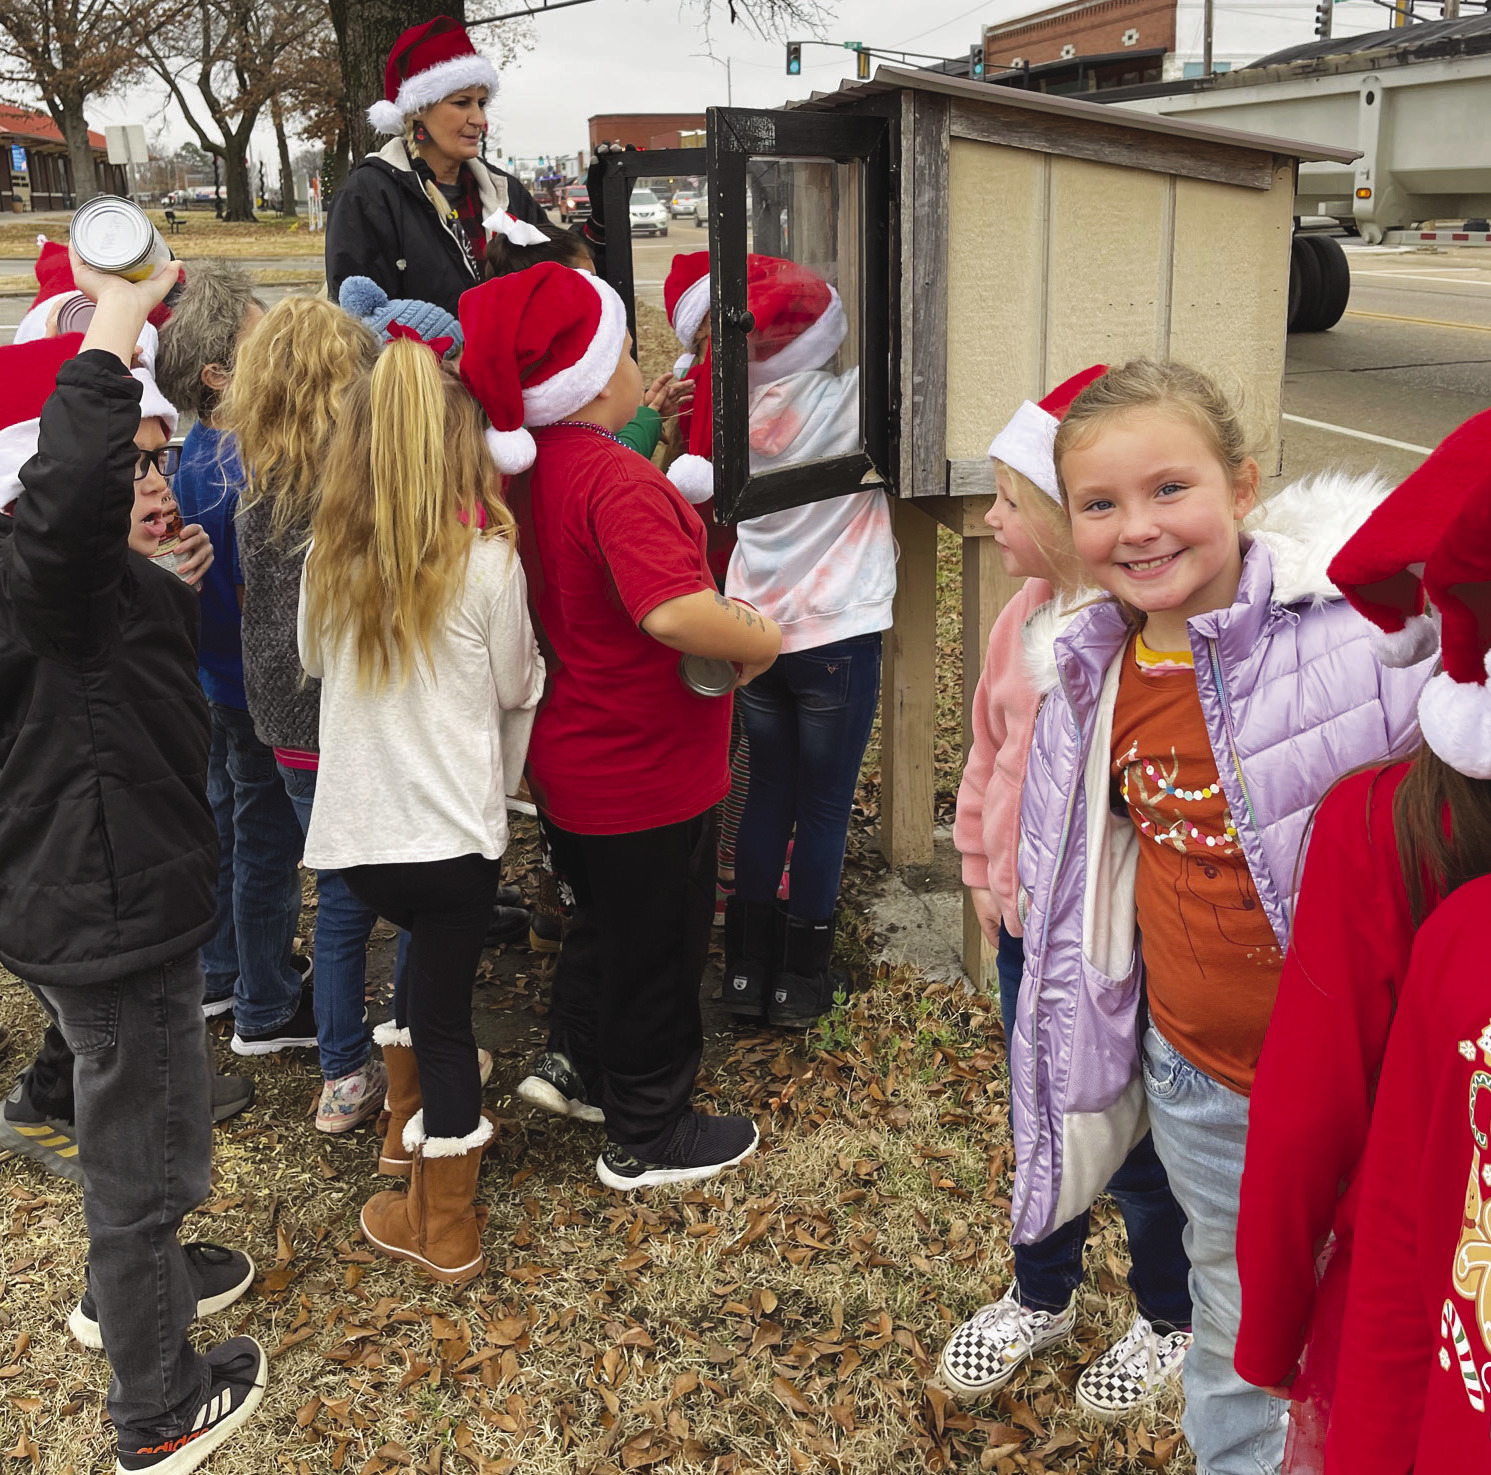 First and second grade students form Central Elementary School recently filled the blessing box at the Stanley Tubbs Memorial Library in Sallisaw, and also sang Christmas carols at nurse Vickie Hodges’ house. The students had a wonderful time spreading holiday cheer! PHOTOS BY COURTNEY BARKER